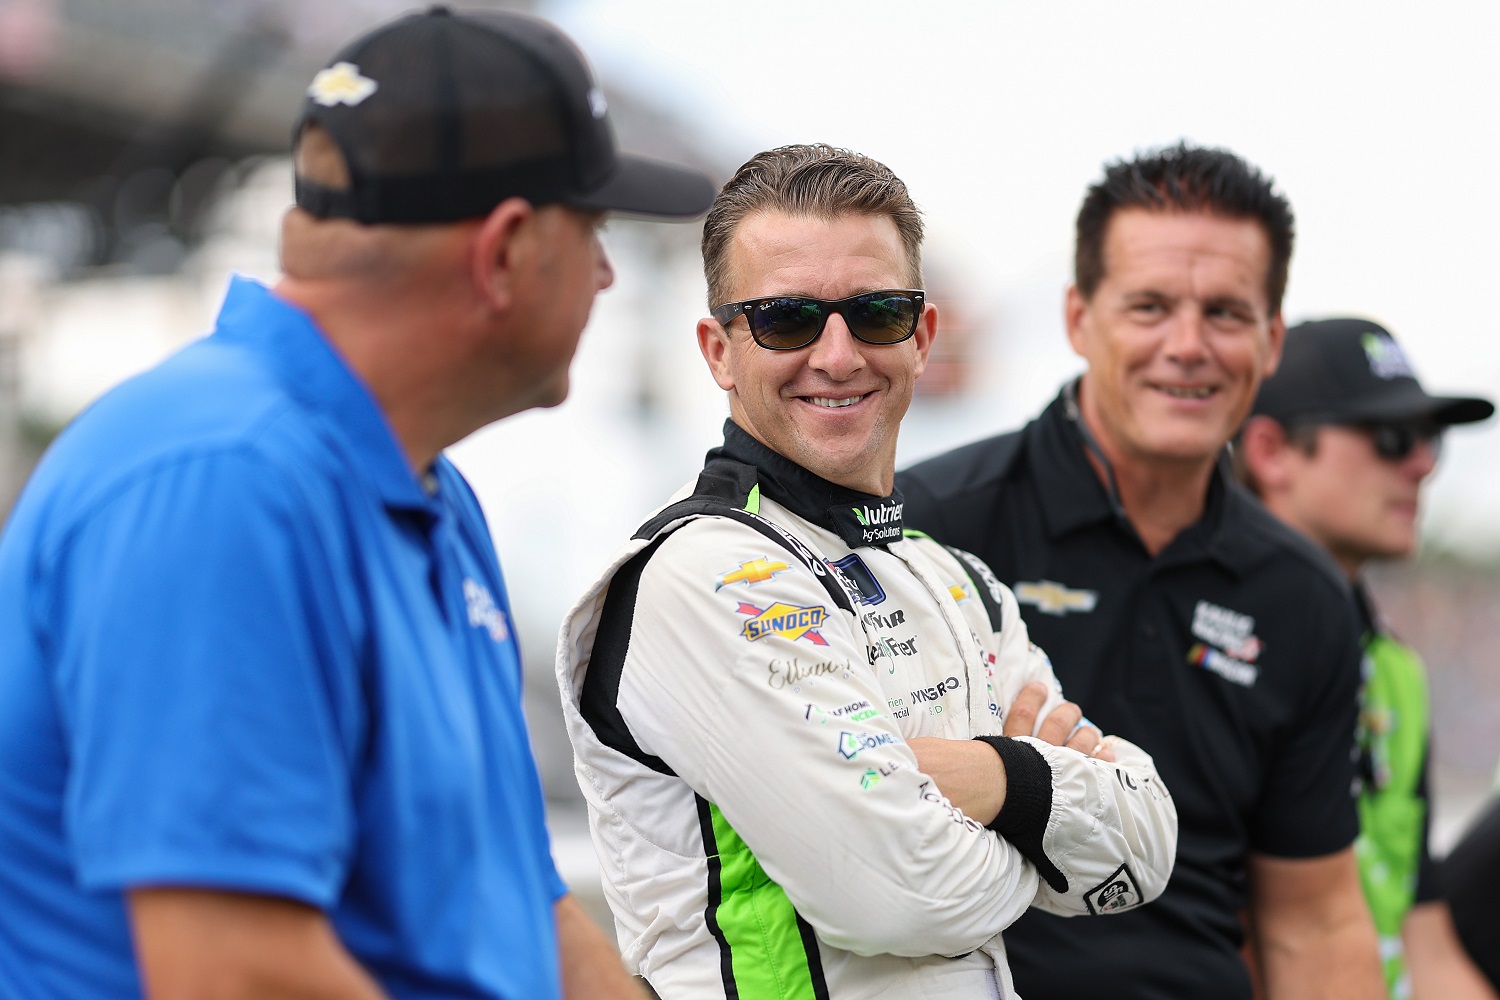 Team president Chris Rice, driver AJ Allmendinger, and owner Matt Kaulig of Kaulig Racing talk on the grid prior to the the NASCAR Xfinity Series Pennzoil 150 at the Brickyard at Indianapolis Motor Speedway on July 30, 2022.